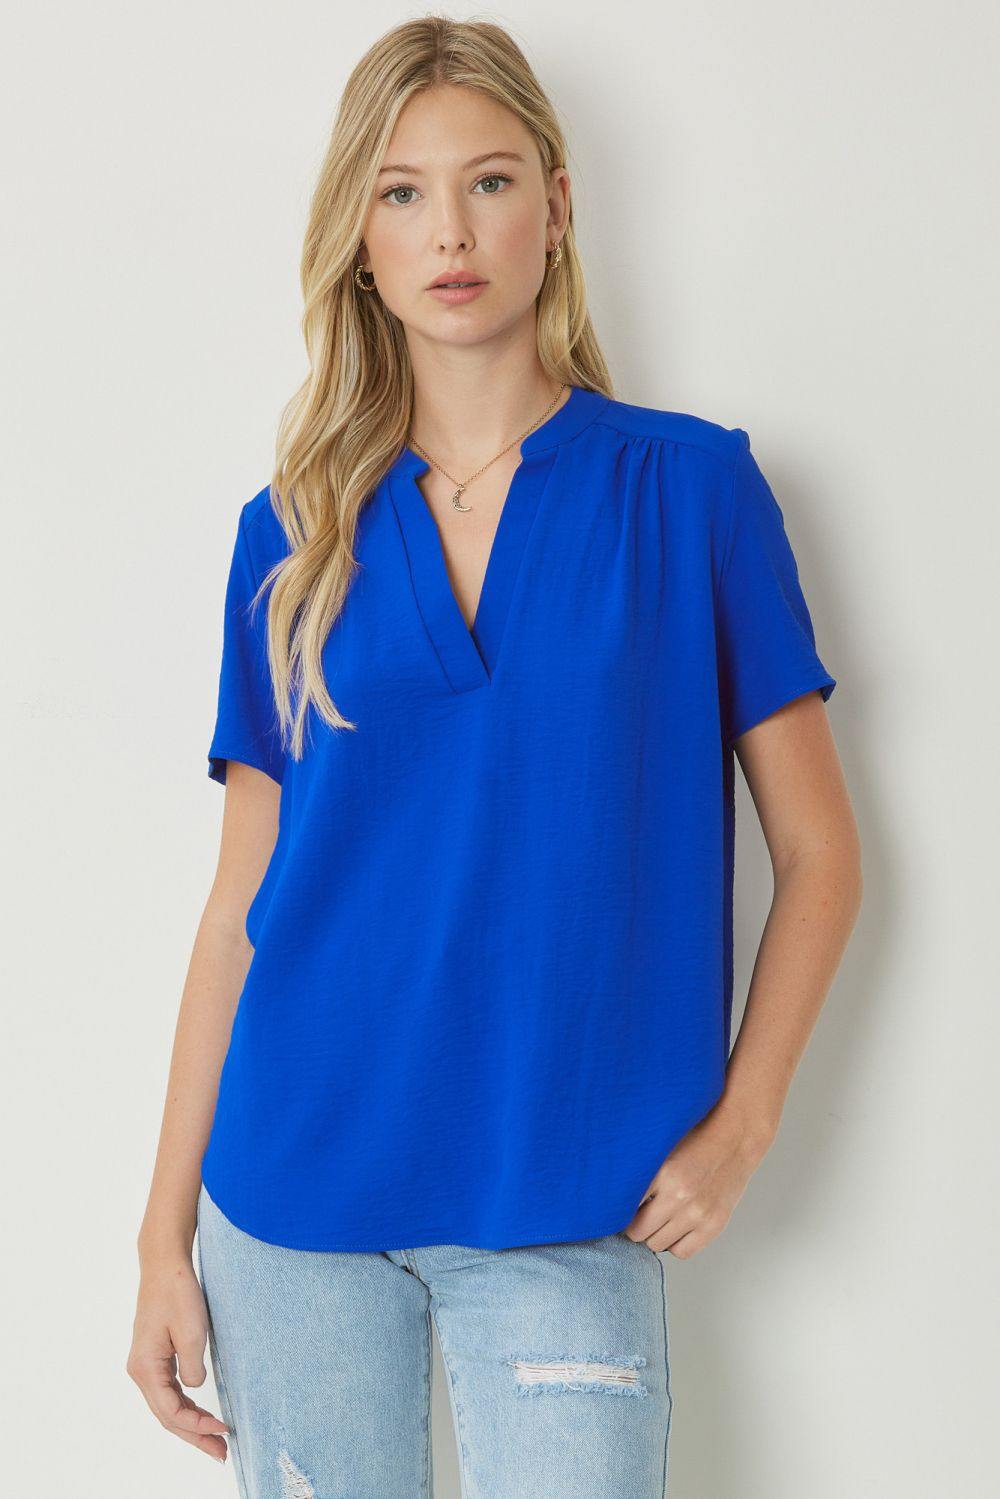 entro brand basic colorful tops Mock Collar Pleat Detailed royal blue